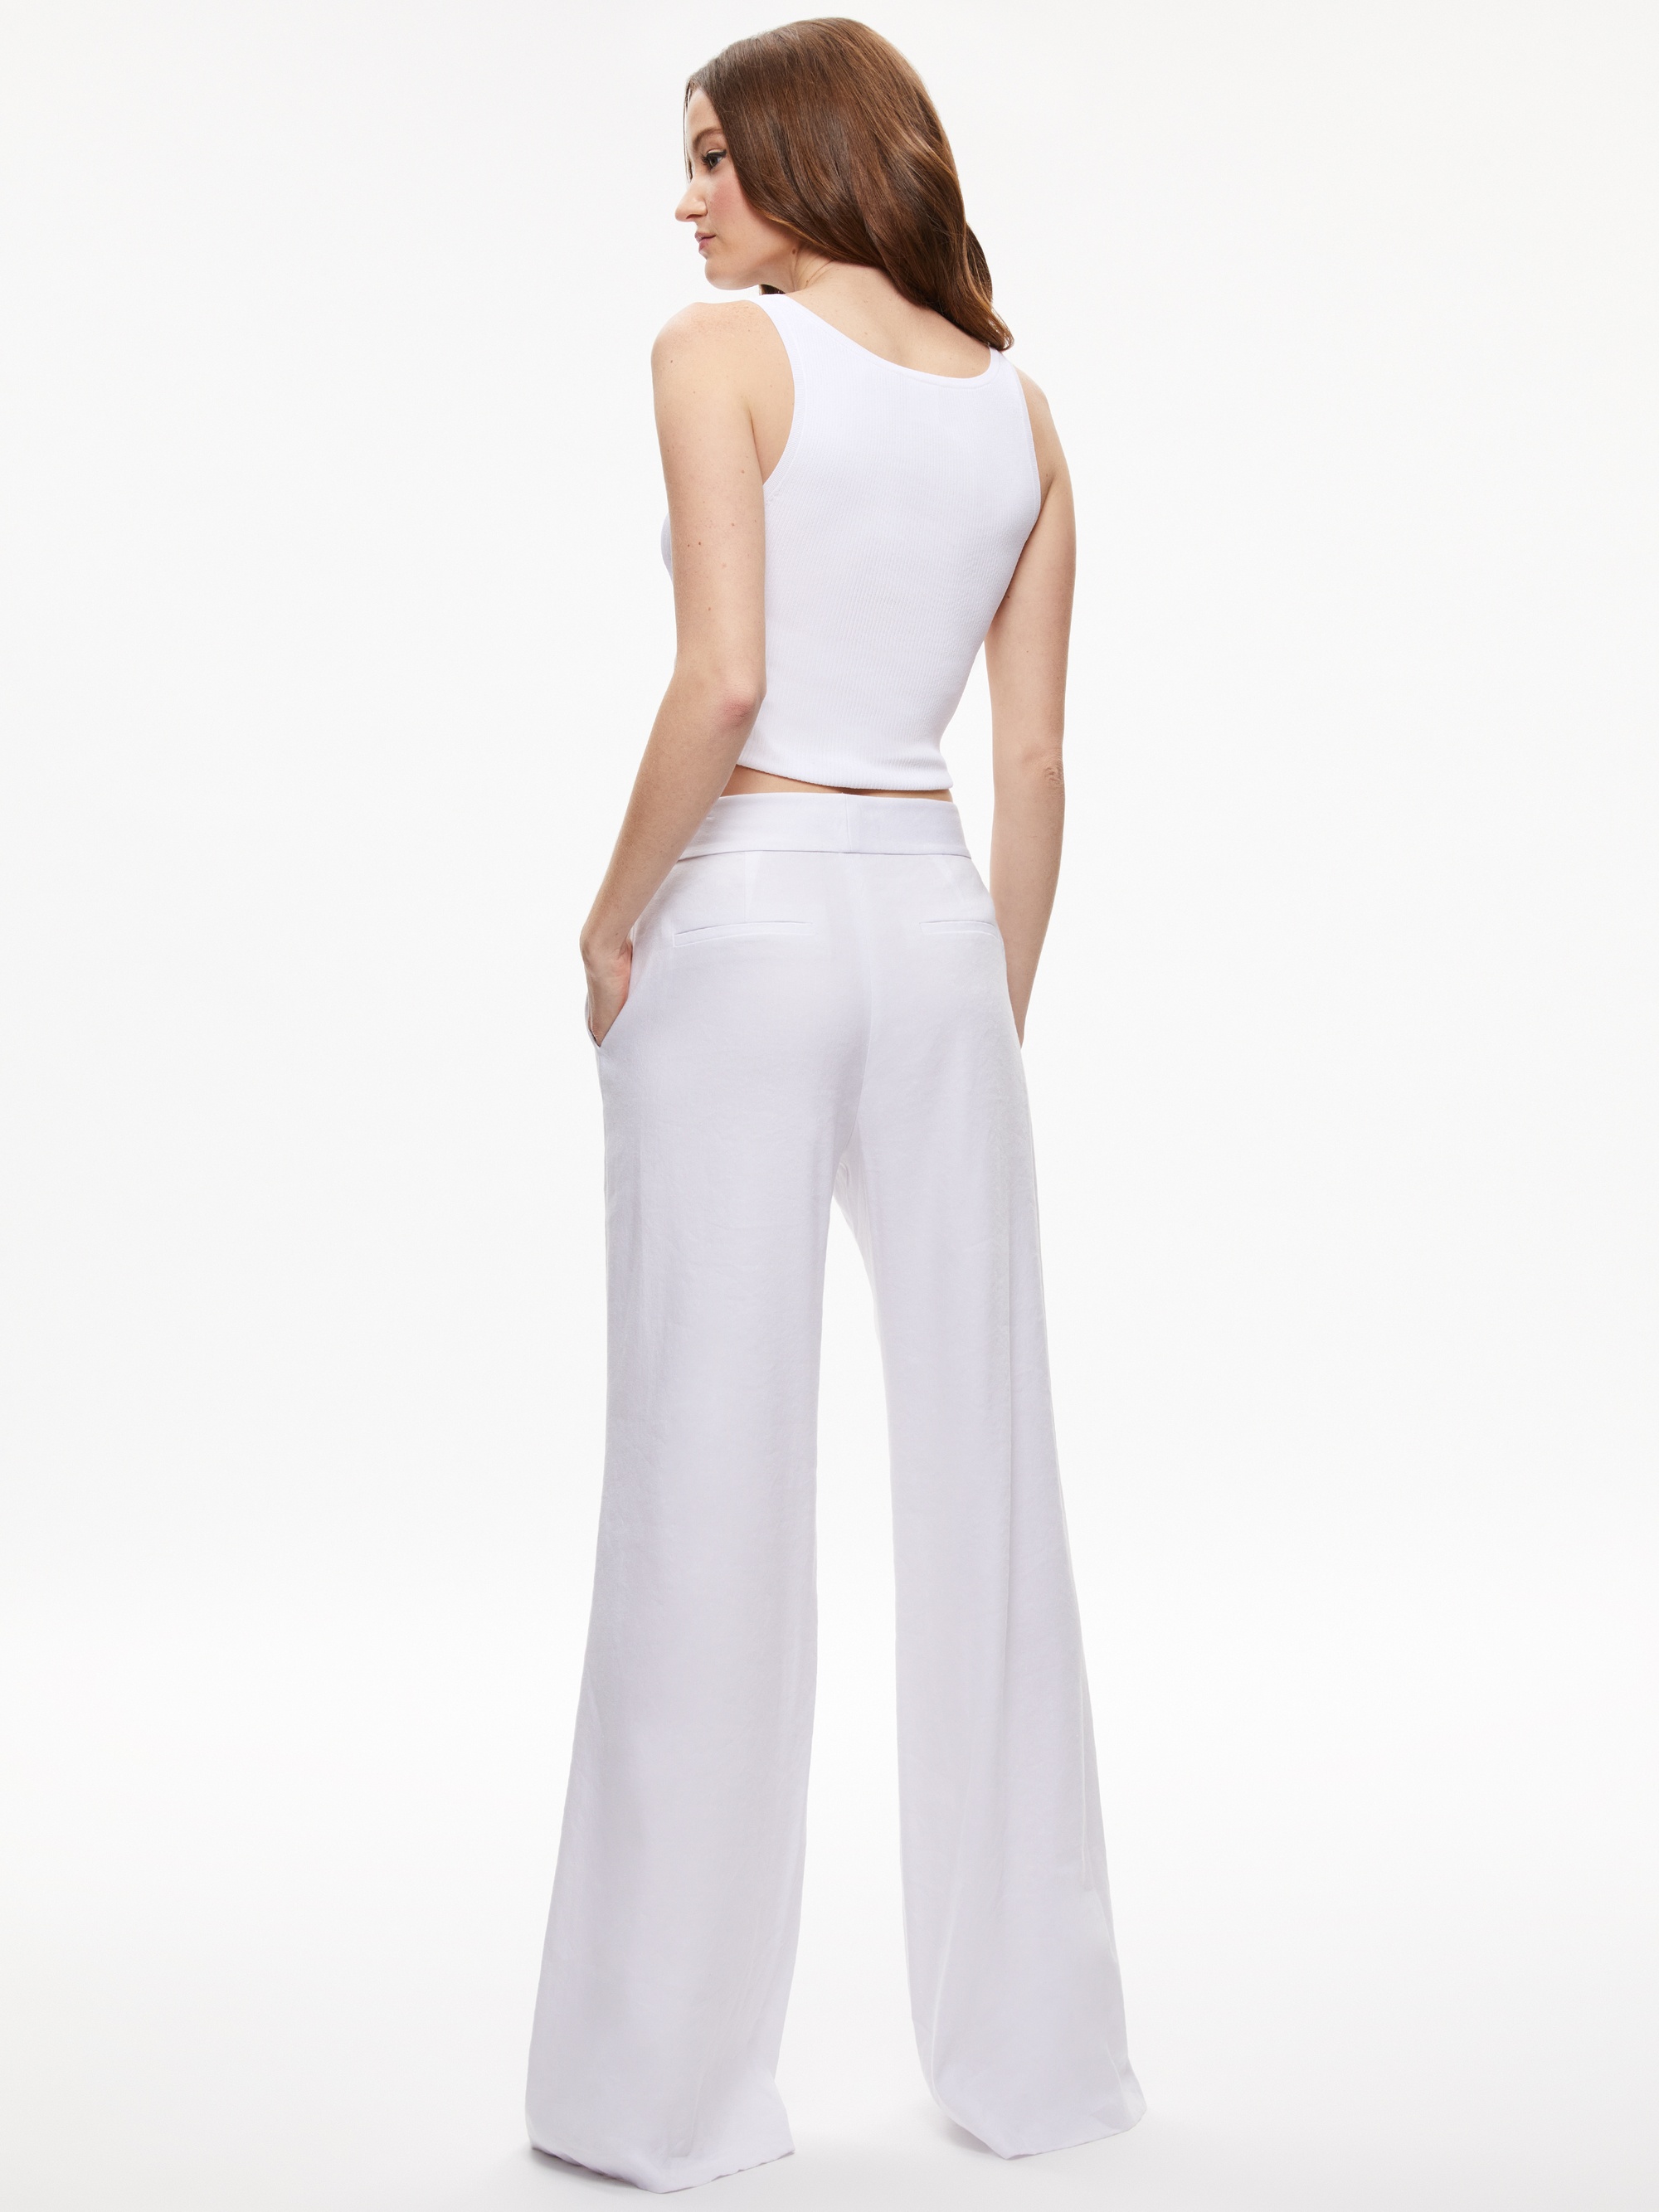 DYLAN HIGH WAISTED WIDE LEG PANT - 3